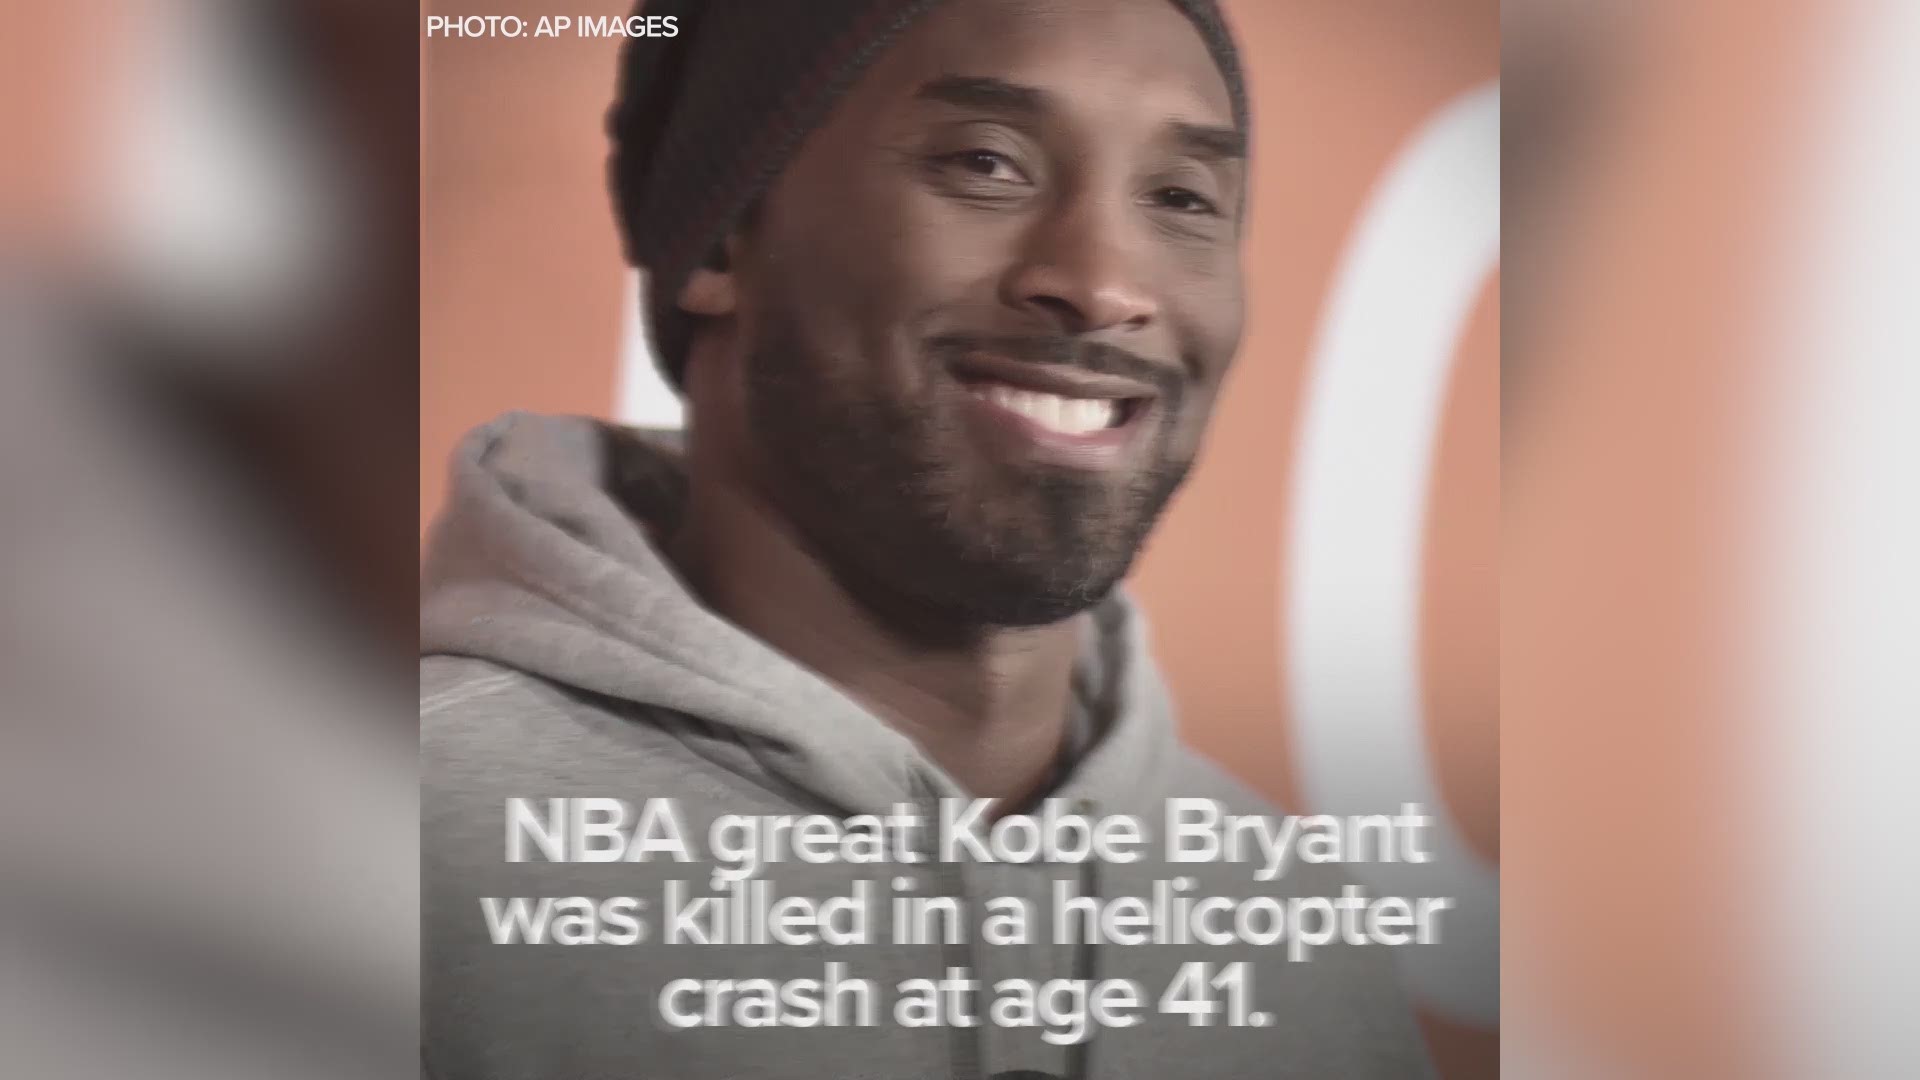 Kobe Bryant and his daughter Gianna were among the nine people killed Sunday in a helicopter crash in California.